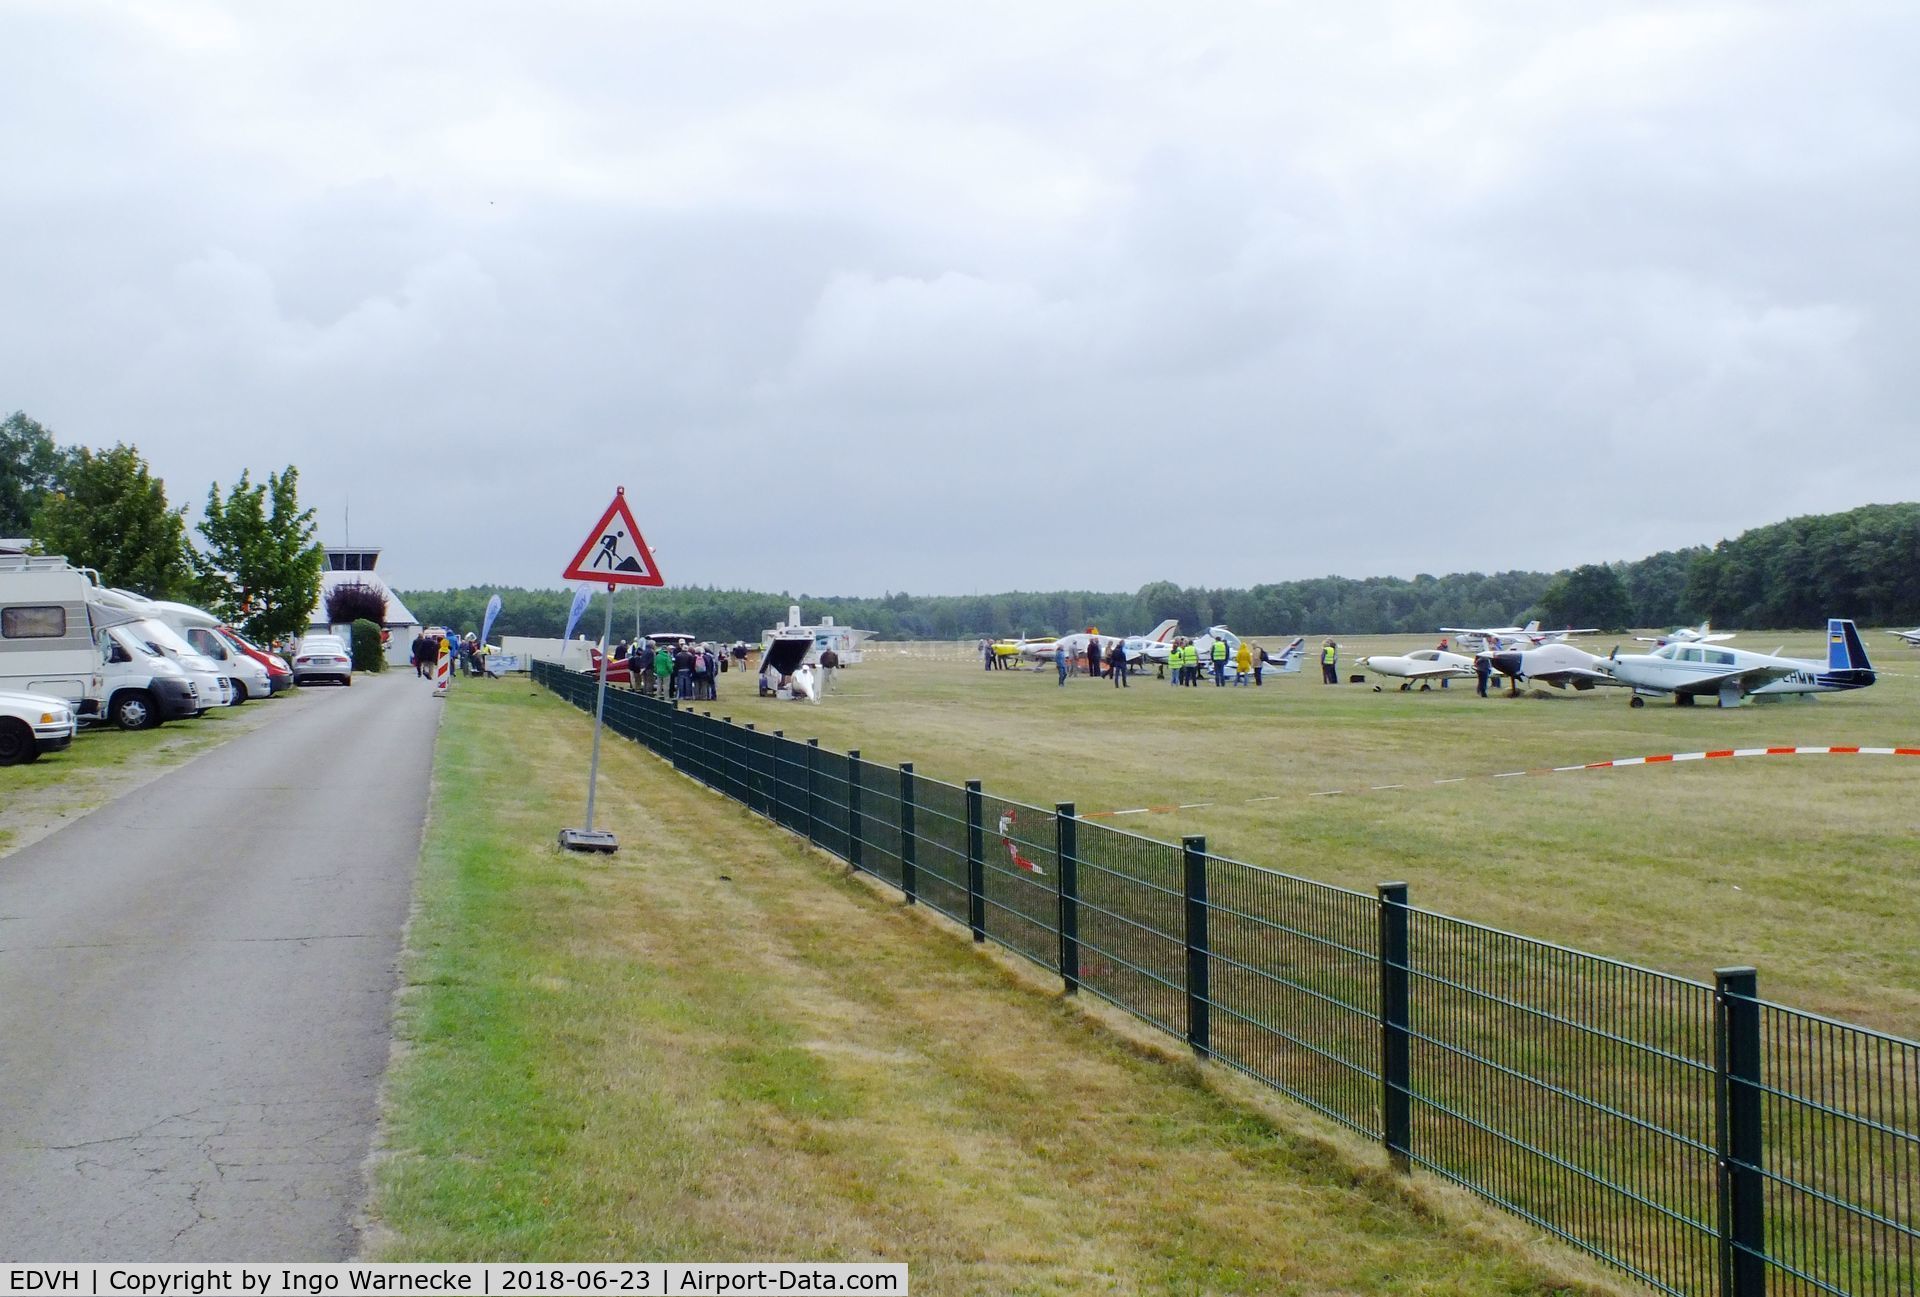 EDVH Airport - arriving at Hodenhagen airfield for the 50th OUV meeting 2018